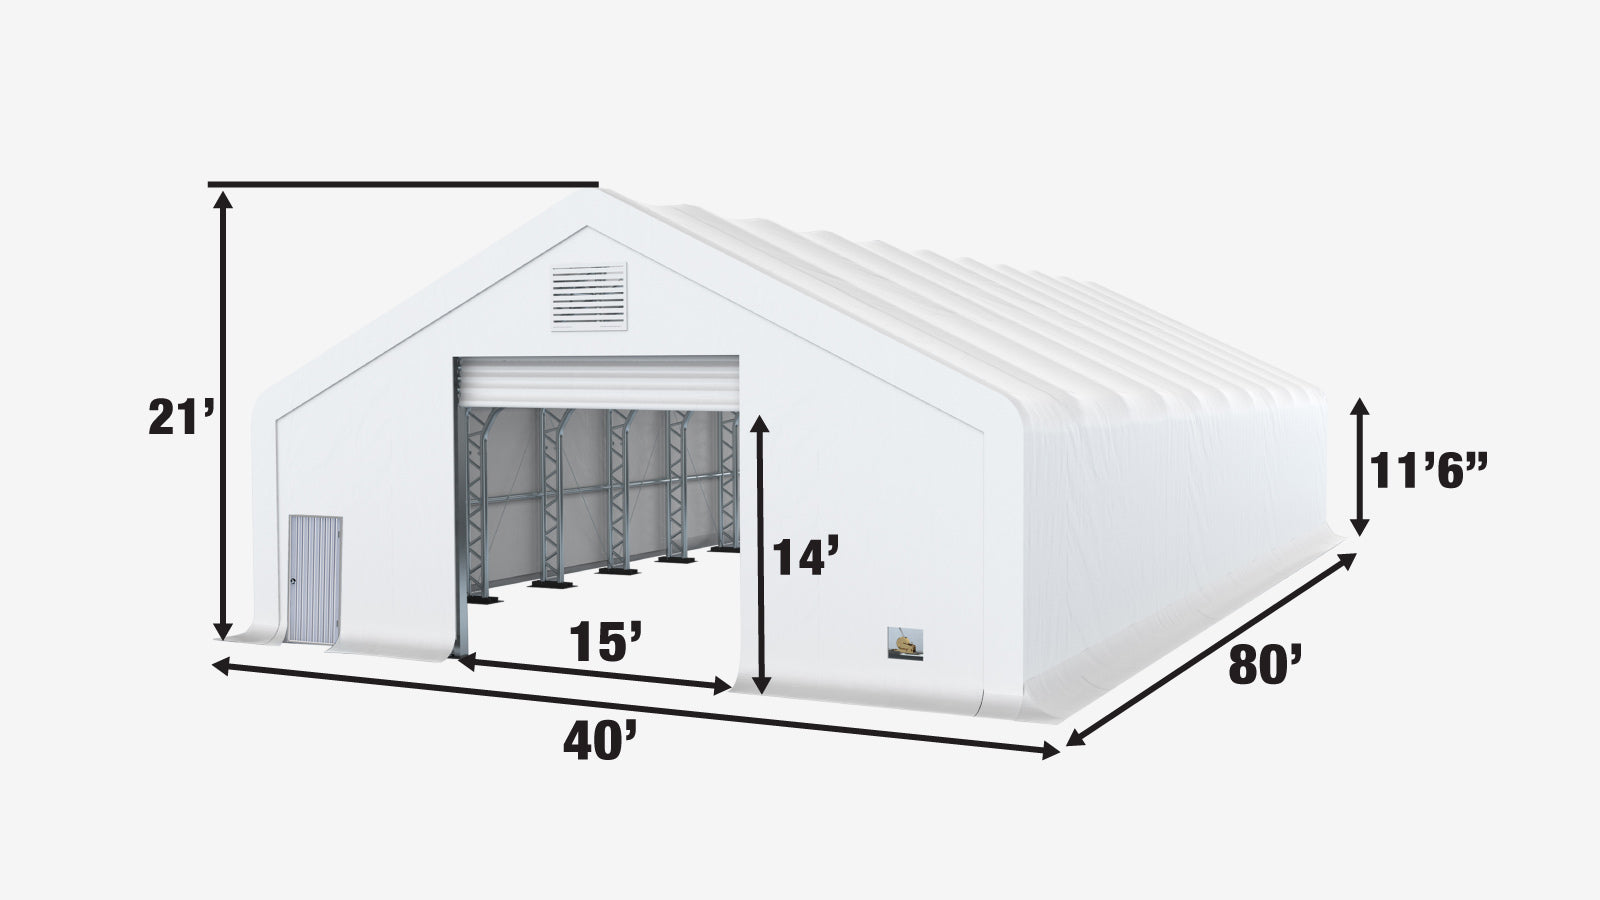 <tc>TMG Industrial Pro Series 40' x 80' Dual Truss Storage Shelter with Heavy Duty 21 oz PVC Cover & Drive Through Doors, TMG-DT4081-PRO (anciennement TMG-DT4080-PRO)</tc>-specifications-image